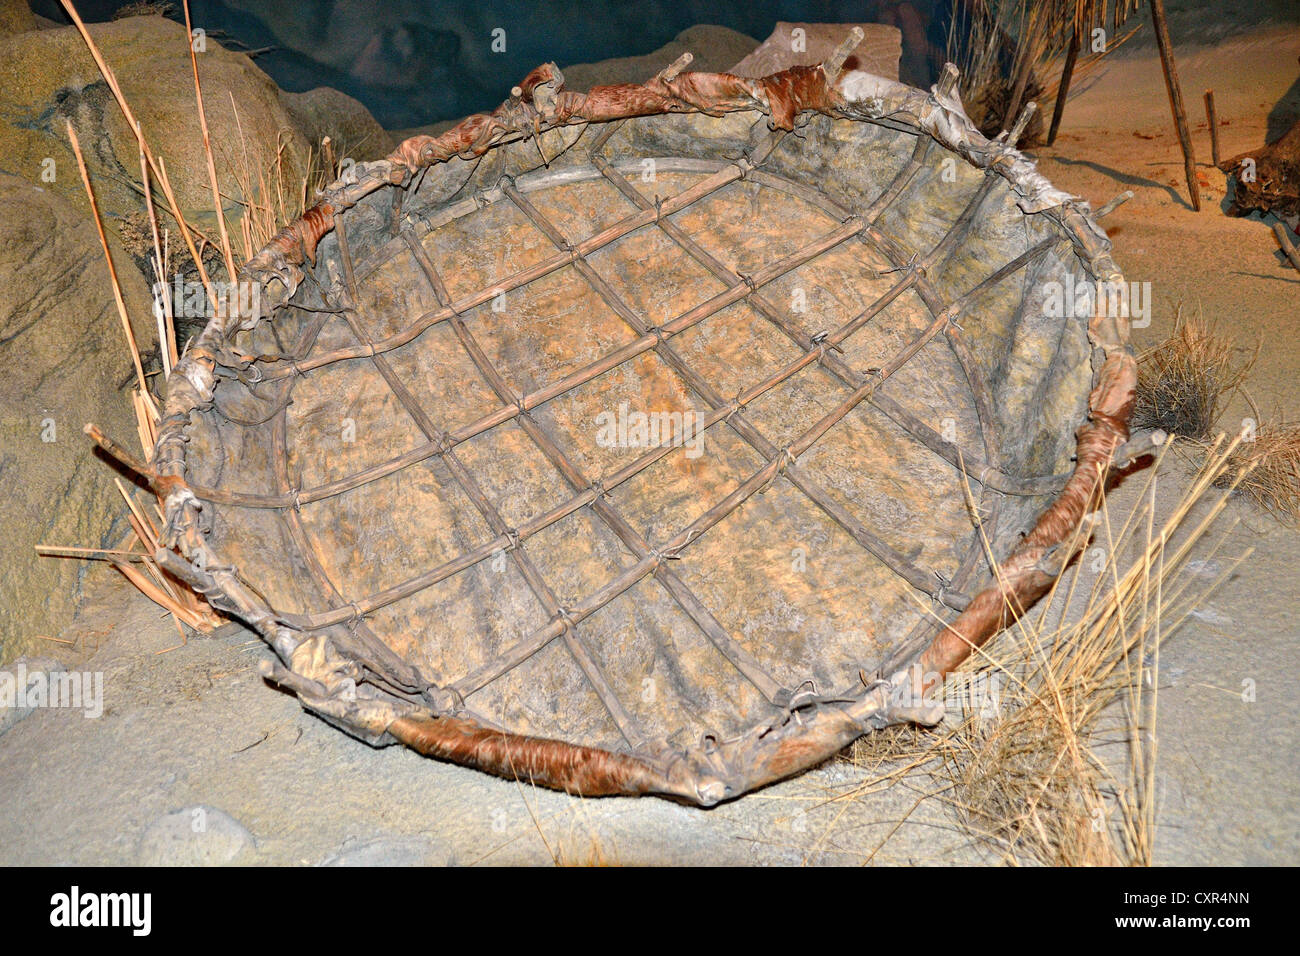 Indian basket made of branches and animal skins, Buffalo Bill Historical Center, Cody, Wyoming, USA Stock Photo